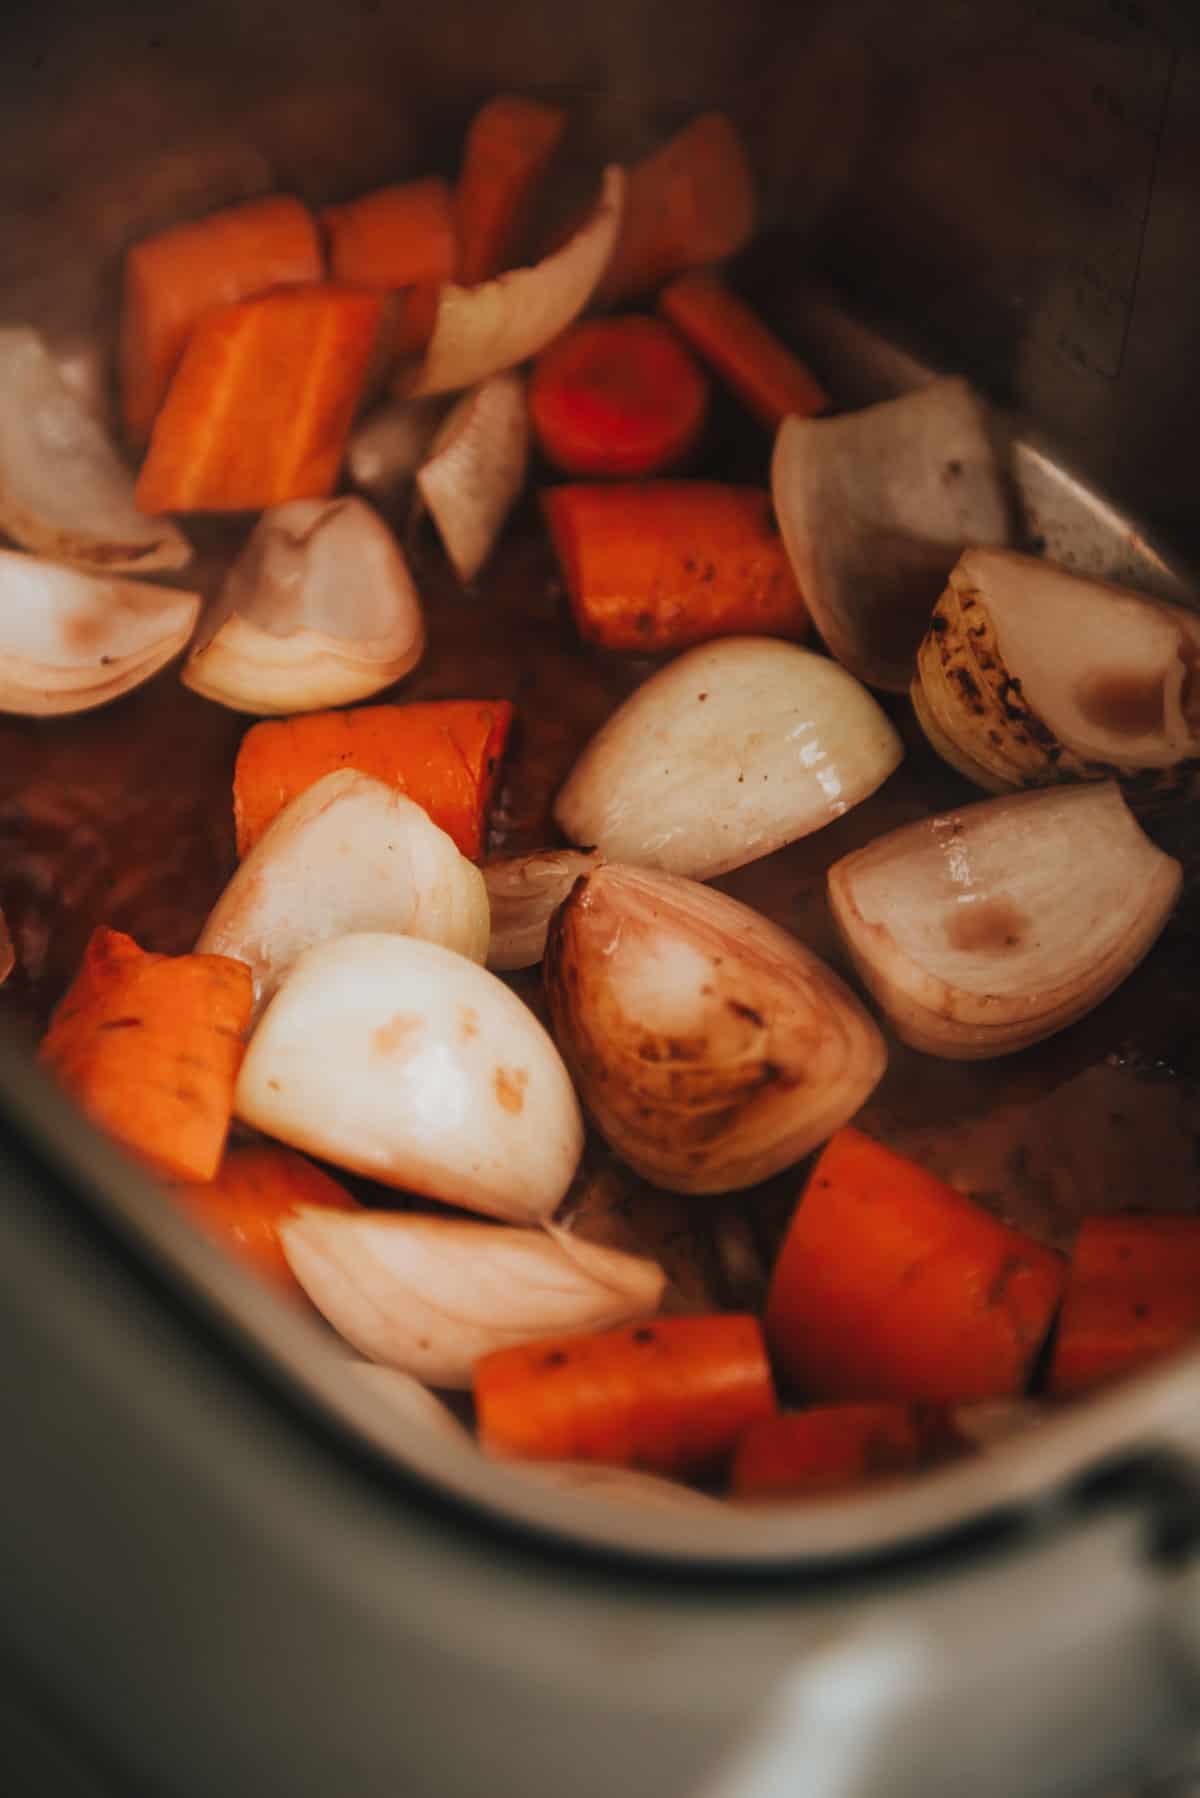 Carrots and onions are being cooked in a slow cooker.